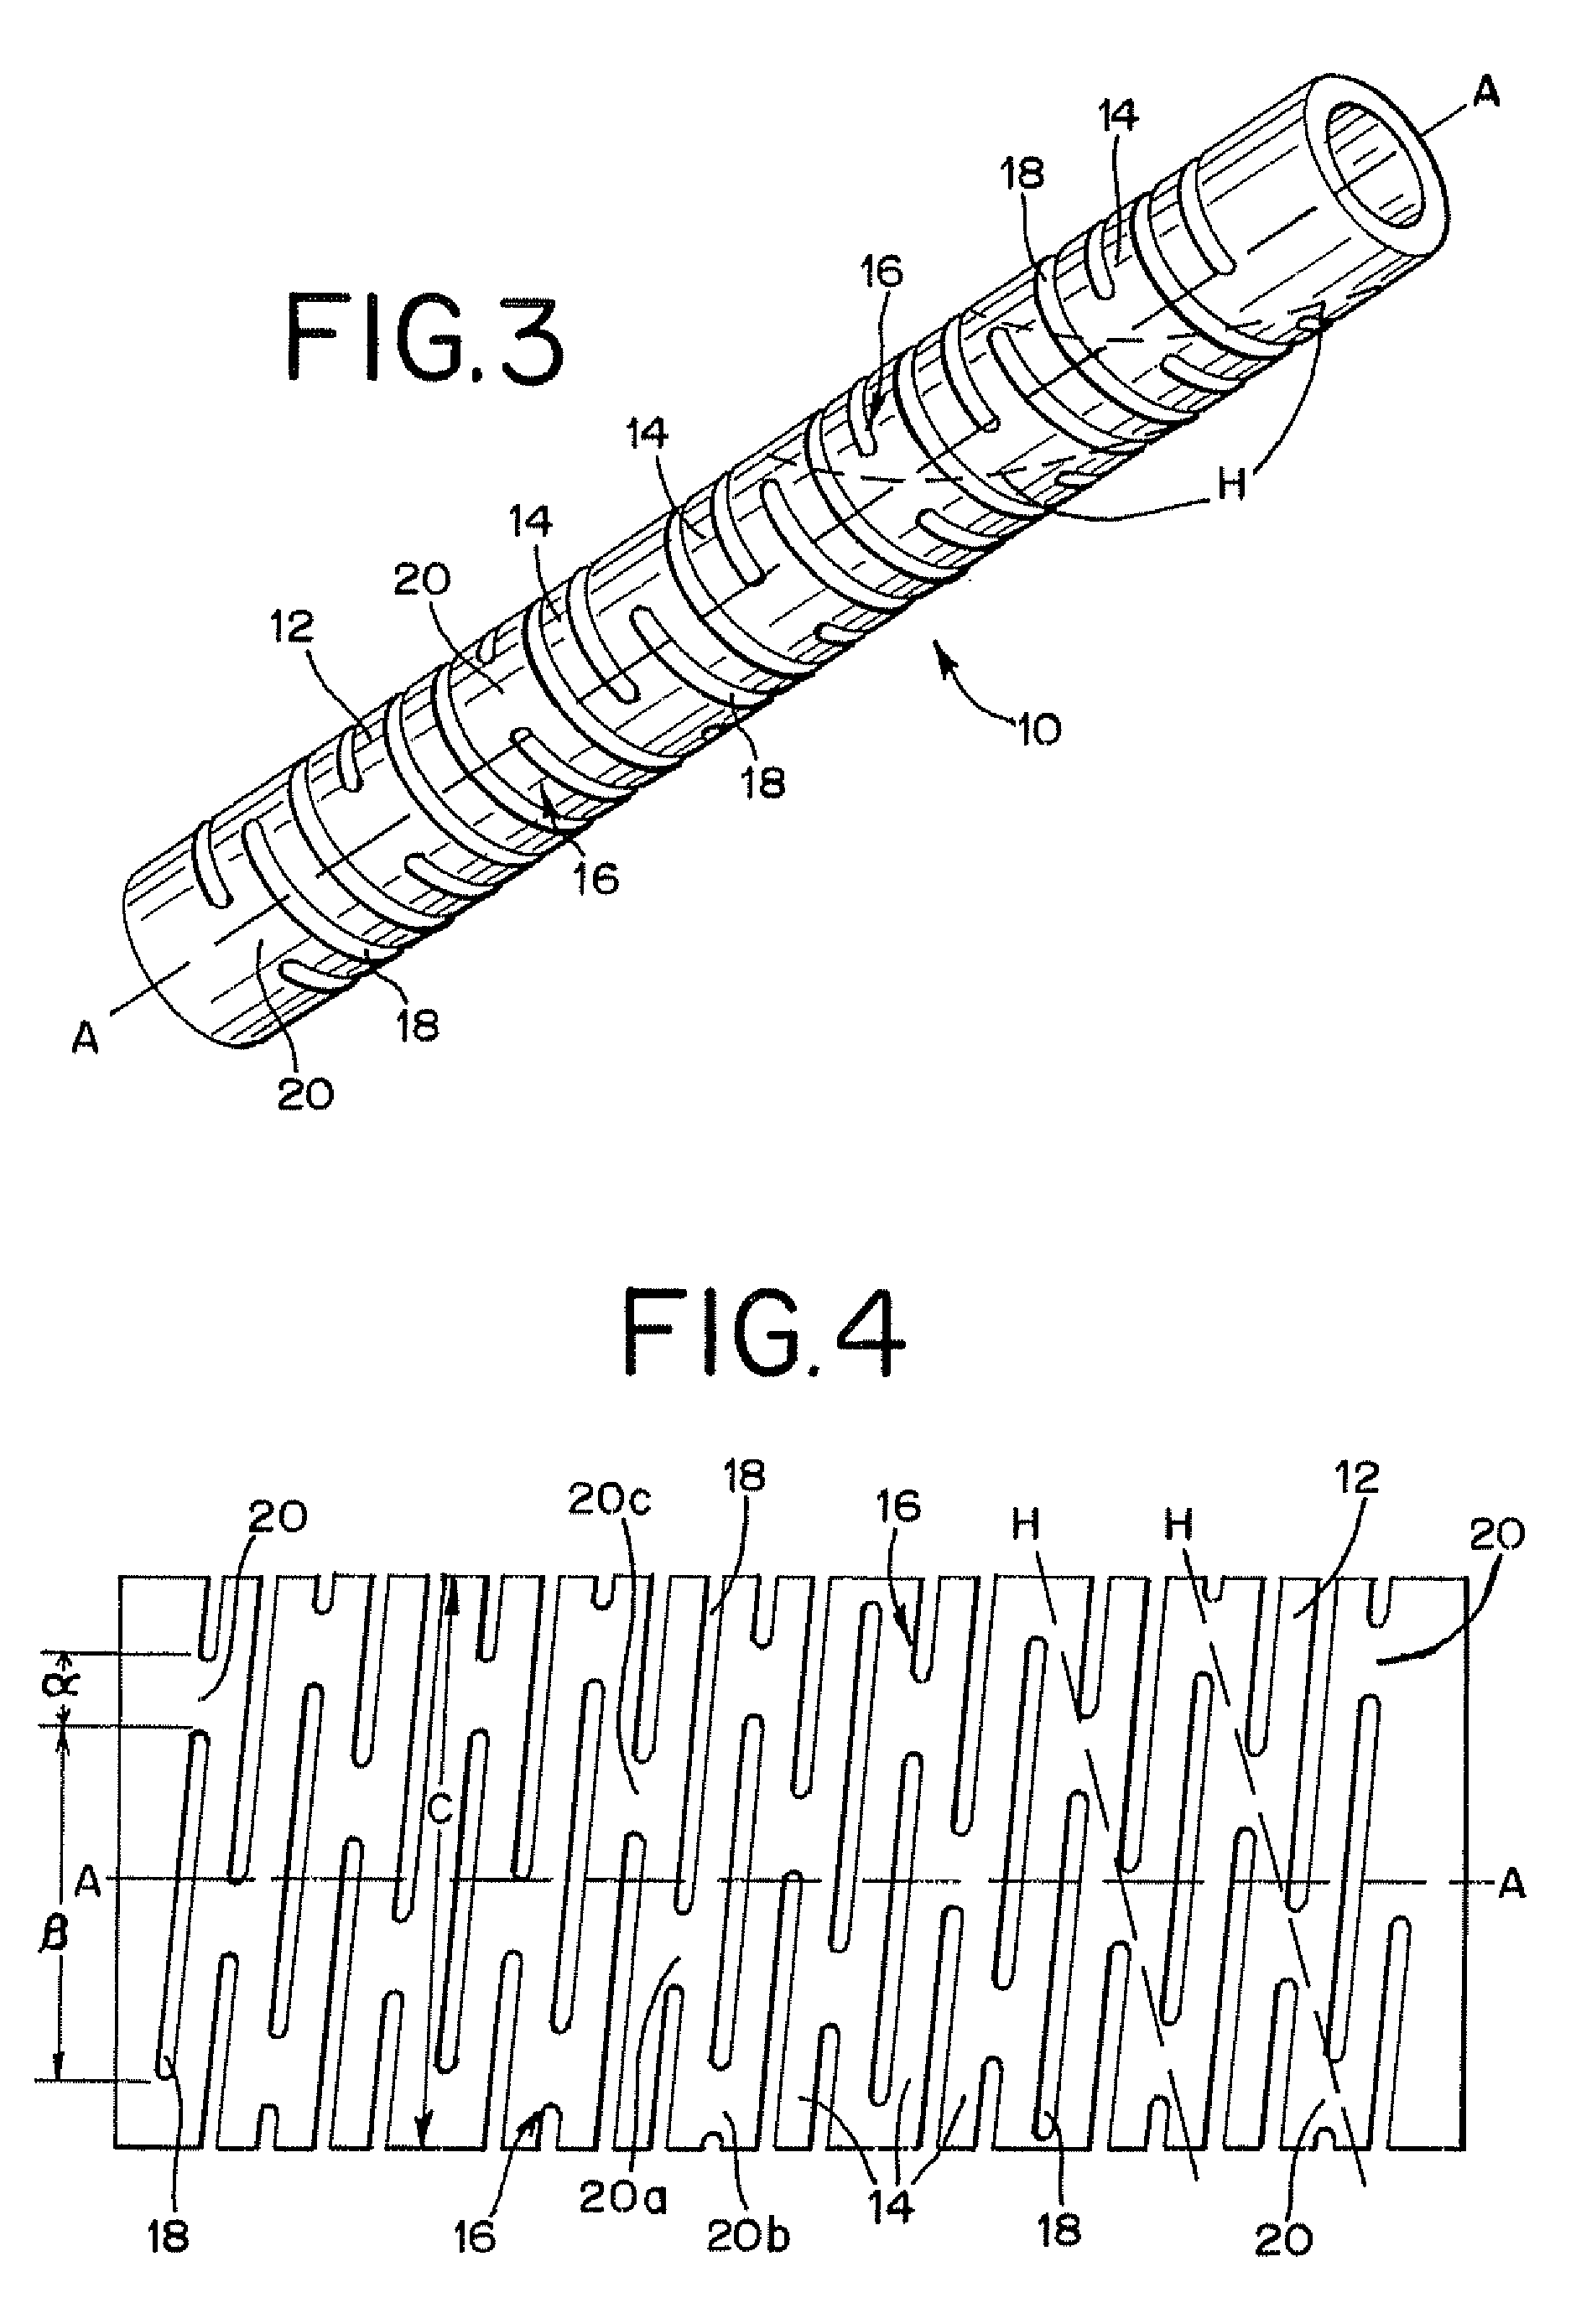 Interventional medical device component having an interrupted spiral section and method of making the same